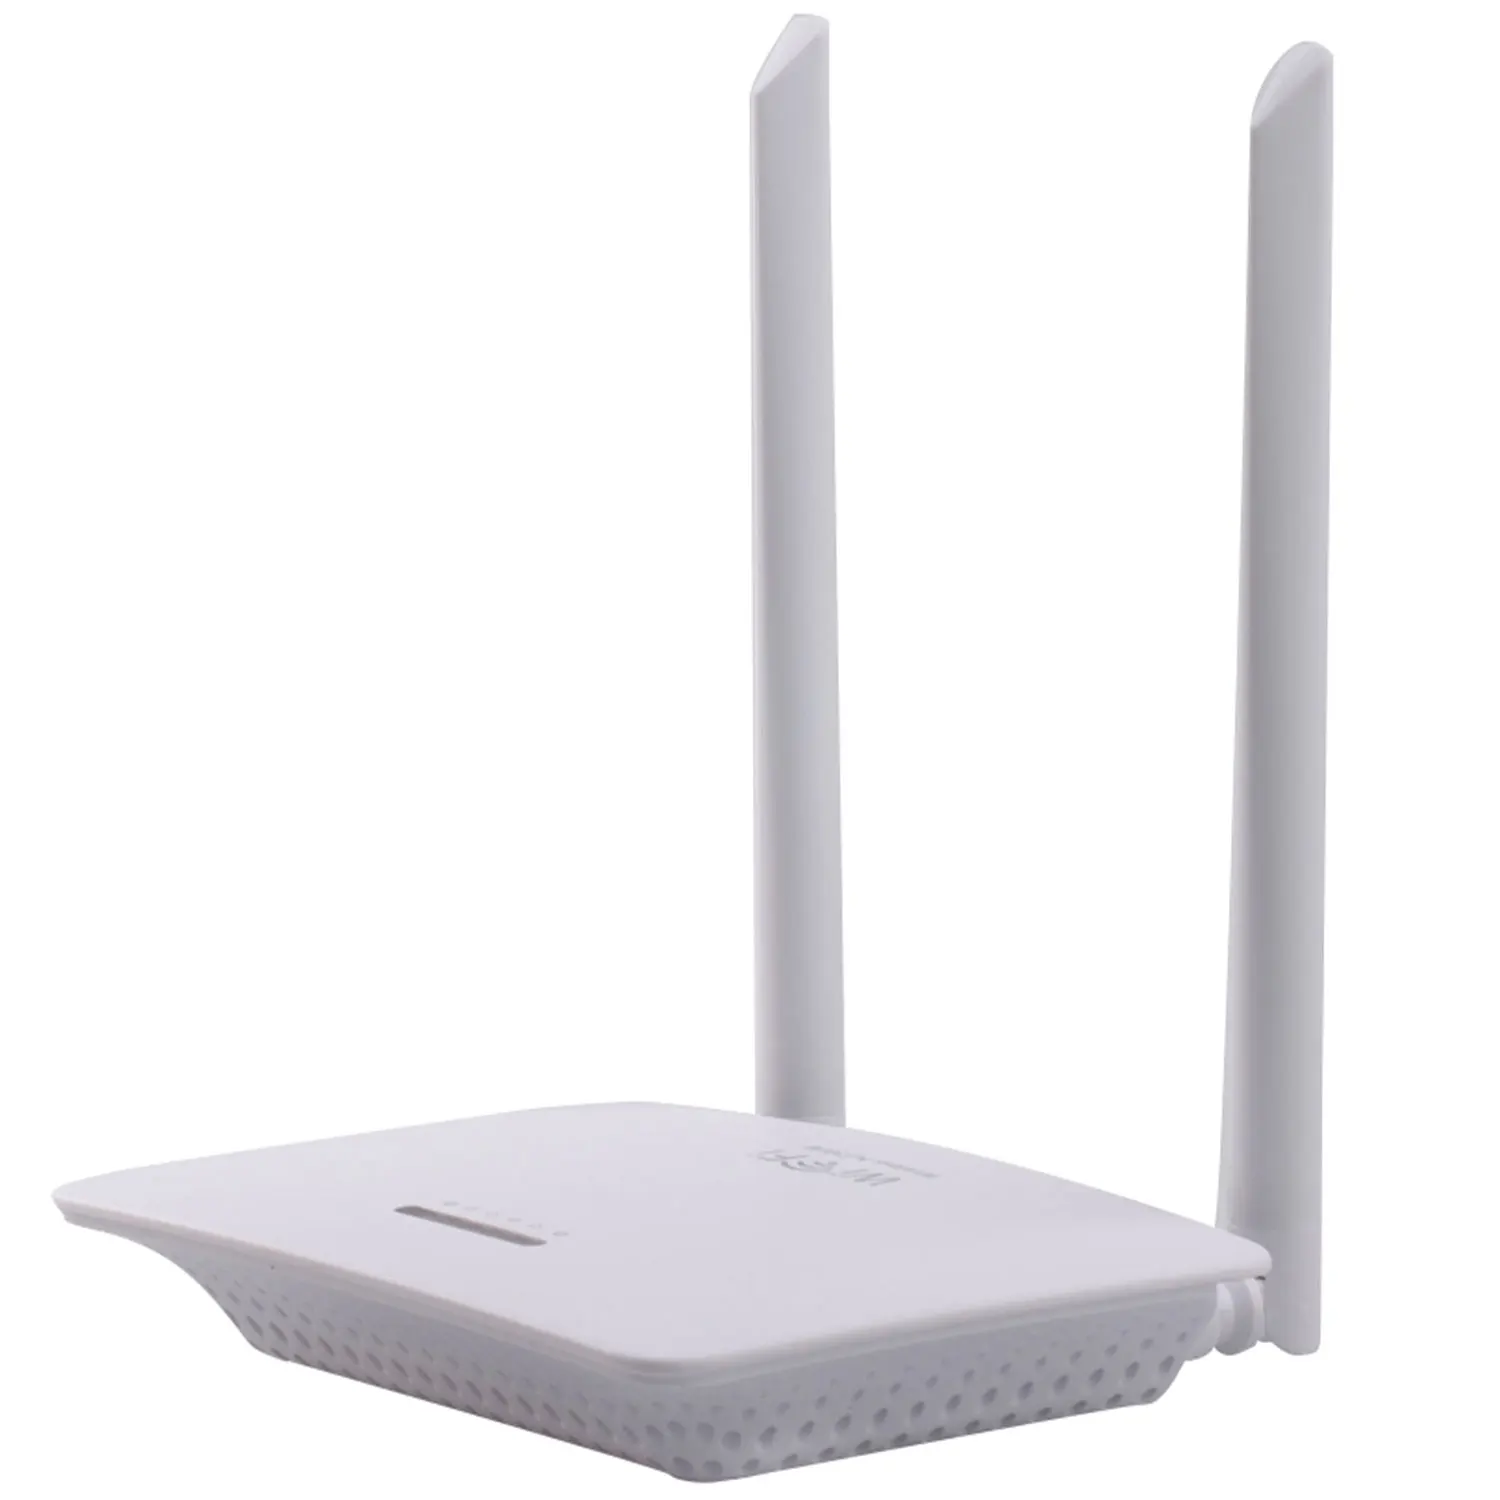 

PIX-LINK Factory Selling High quality 300Mbps 2 antennas signal booster Wireless Router Easy Setup WR07 White